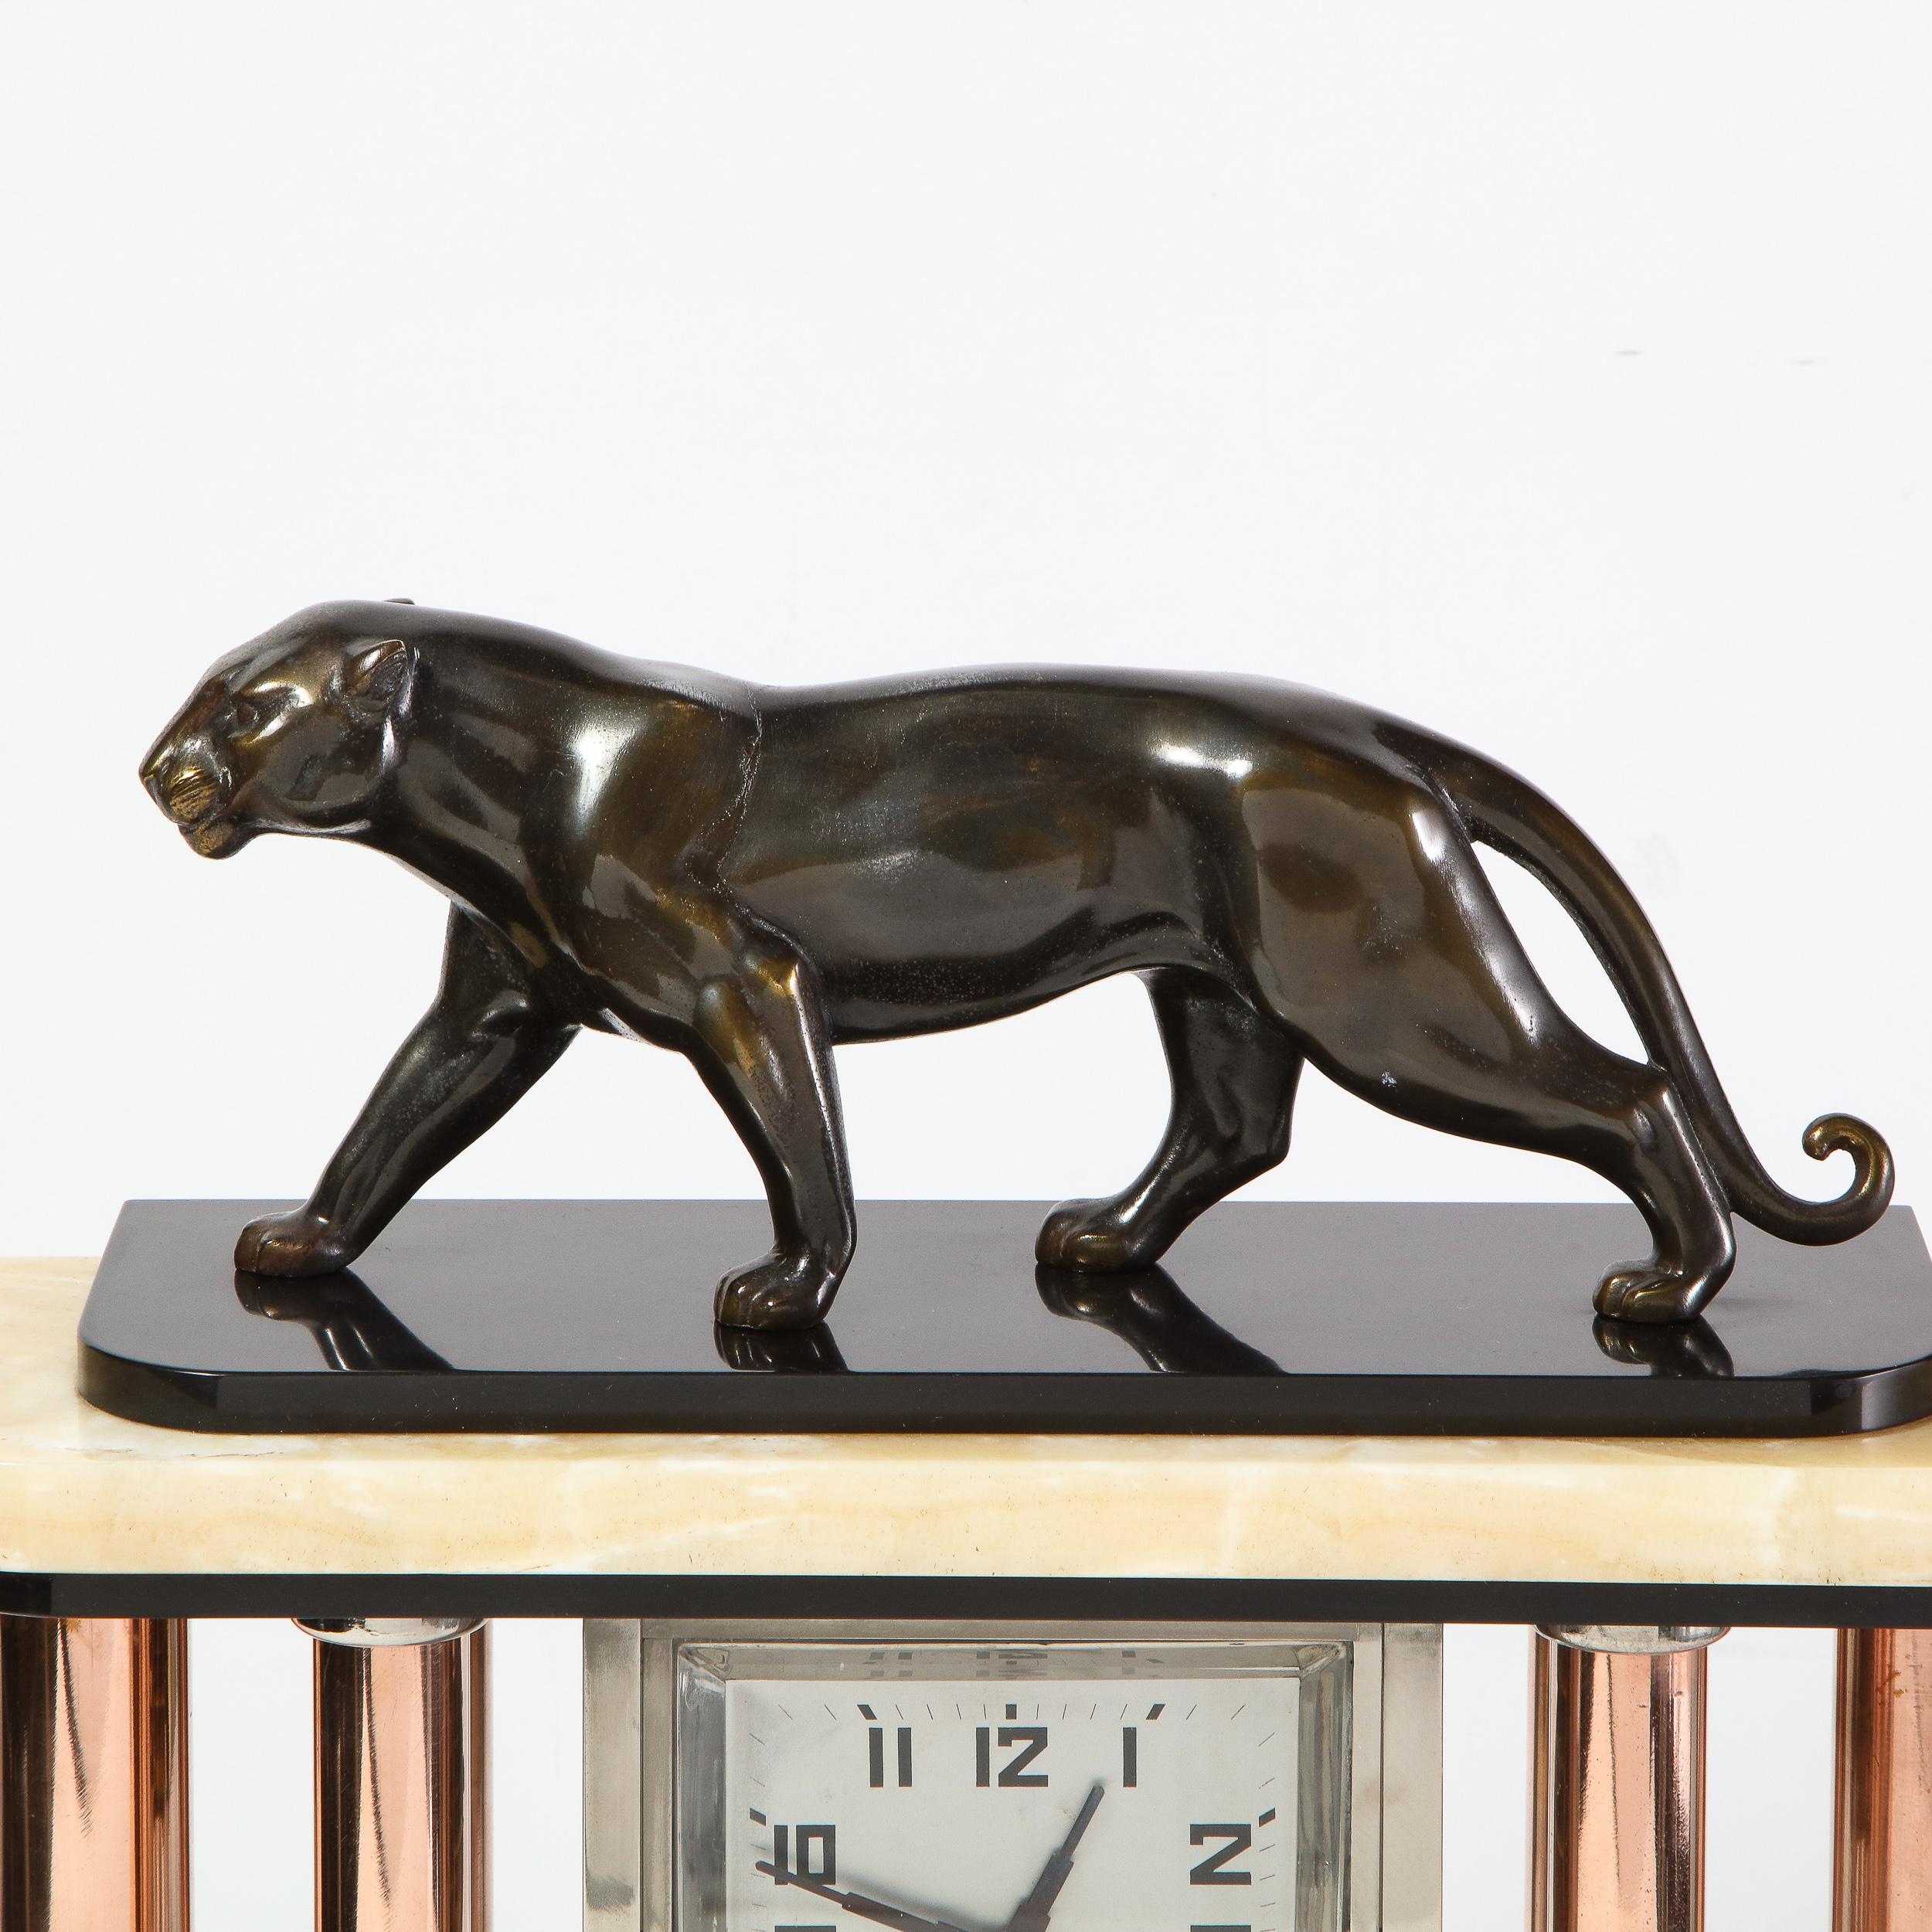 This elegant Art Deco mantel clock was realized in the United States, circa 1930. It features an alabaster base with streamlined sides that connects to a skyscraper style top in alabaster and bronze with a beautifully articulated stylized panther in